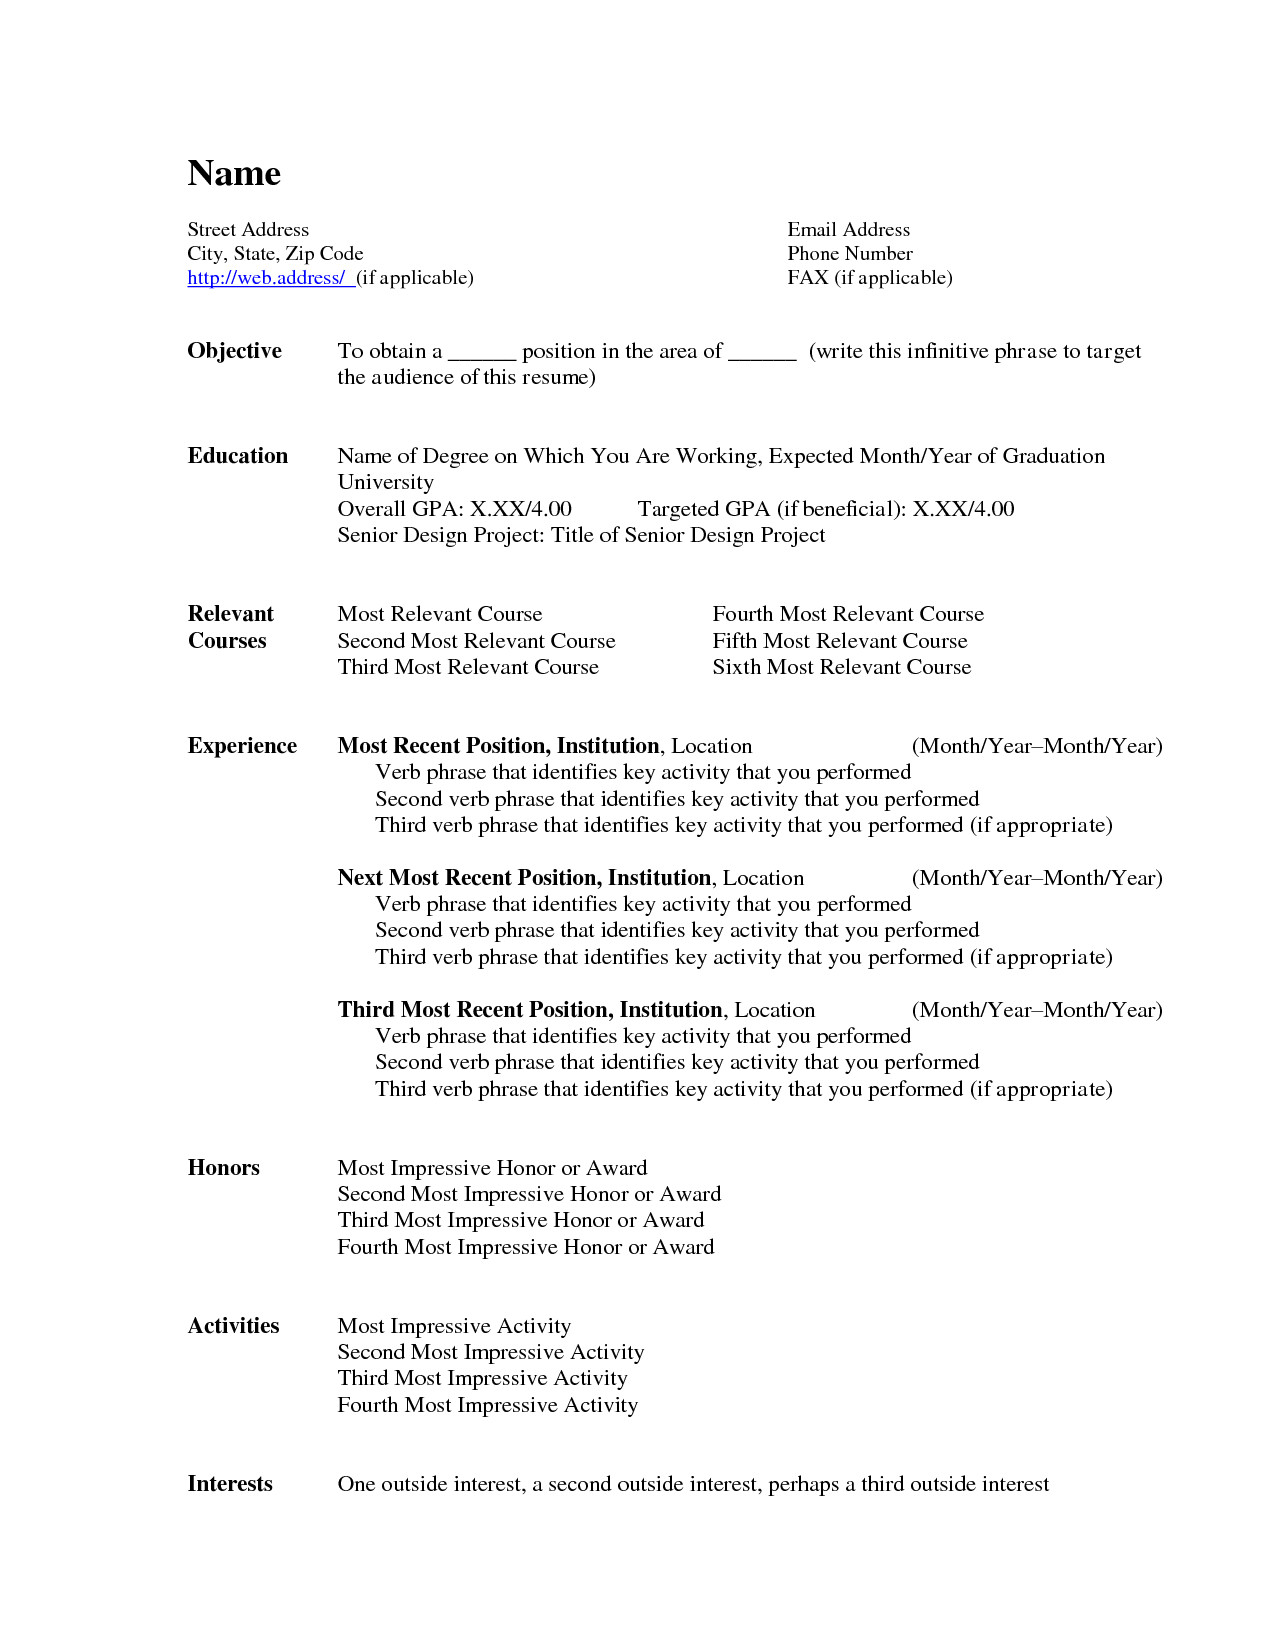 Resume Template Microsoft Word Pin by Resumejob On Resume Job